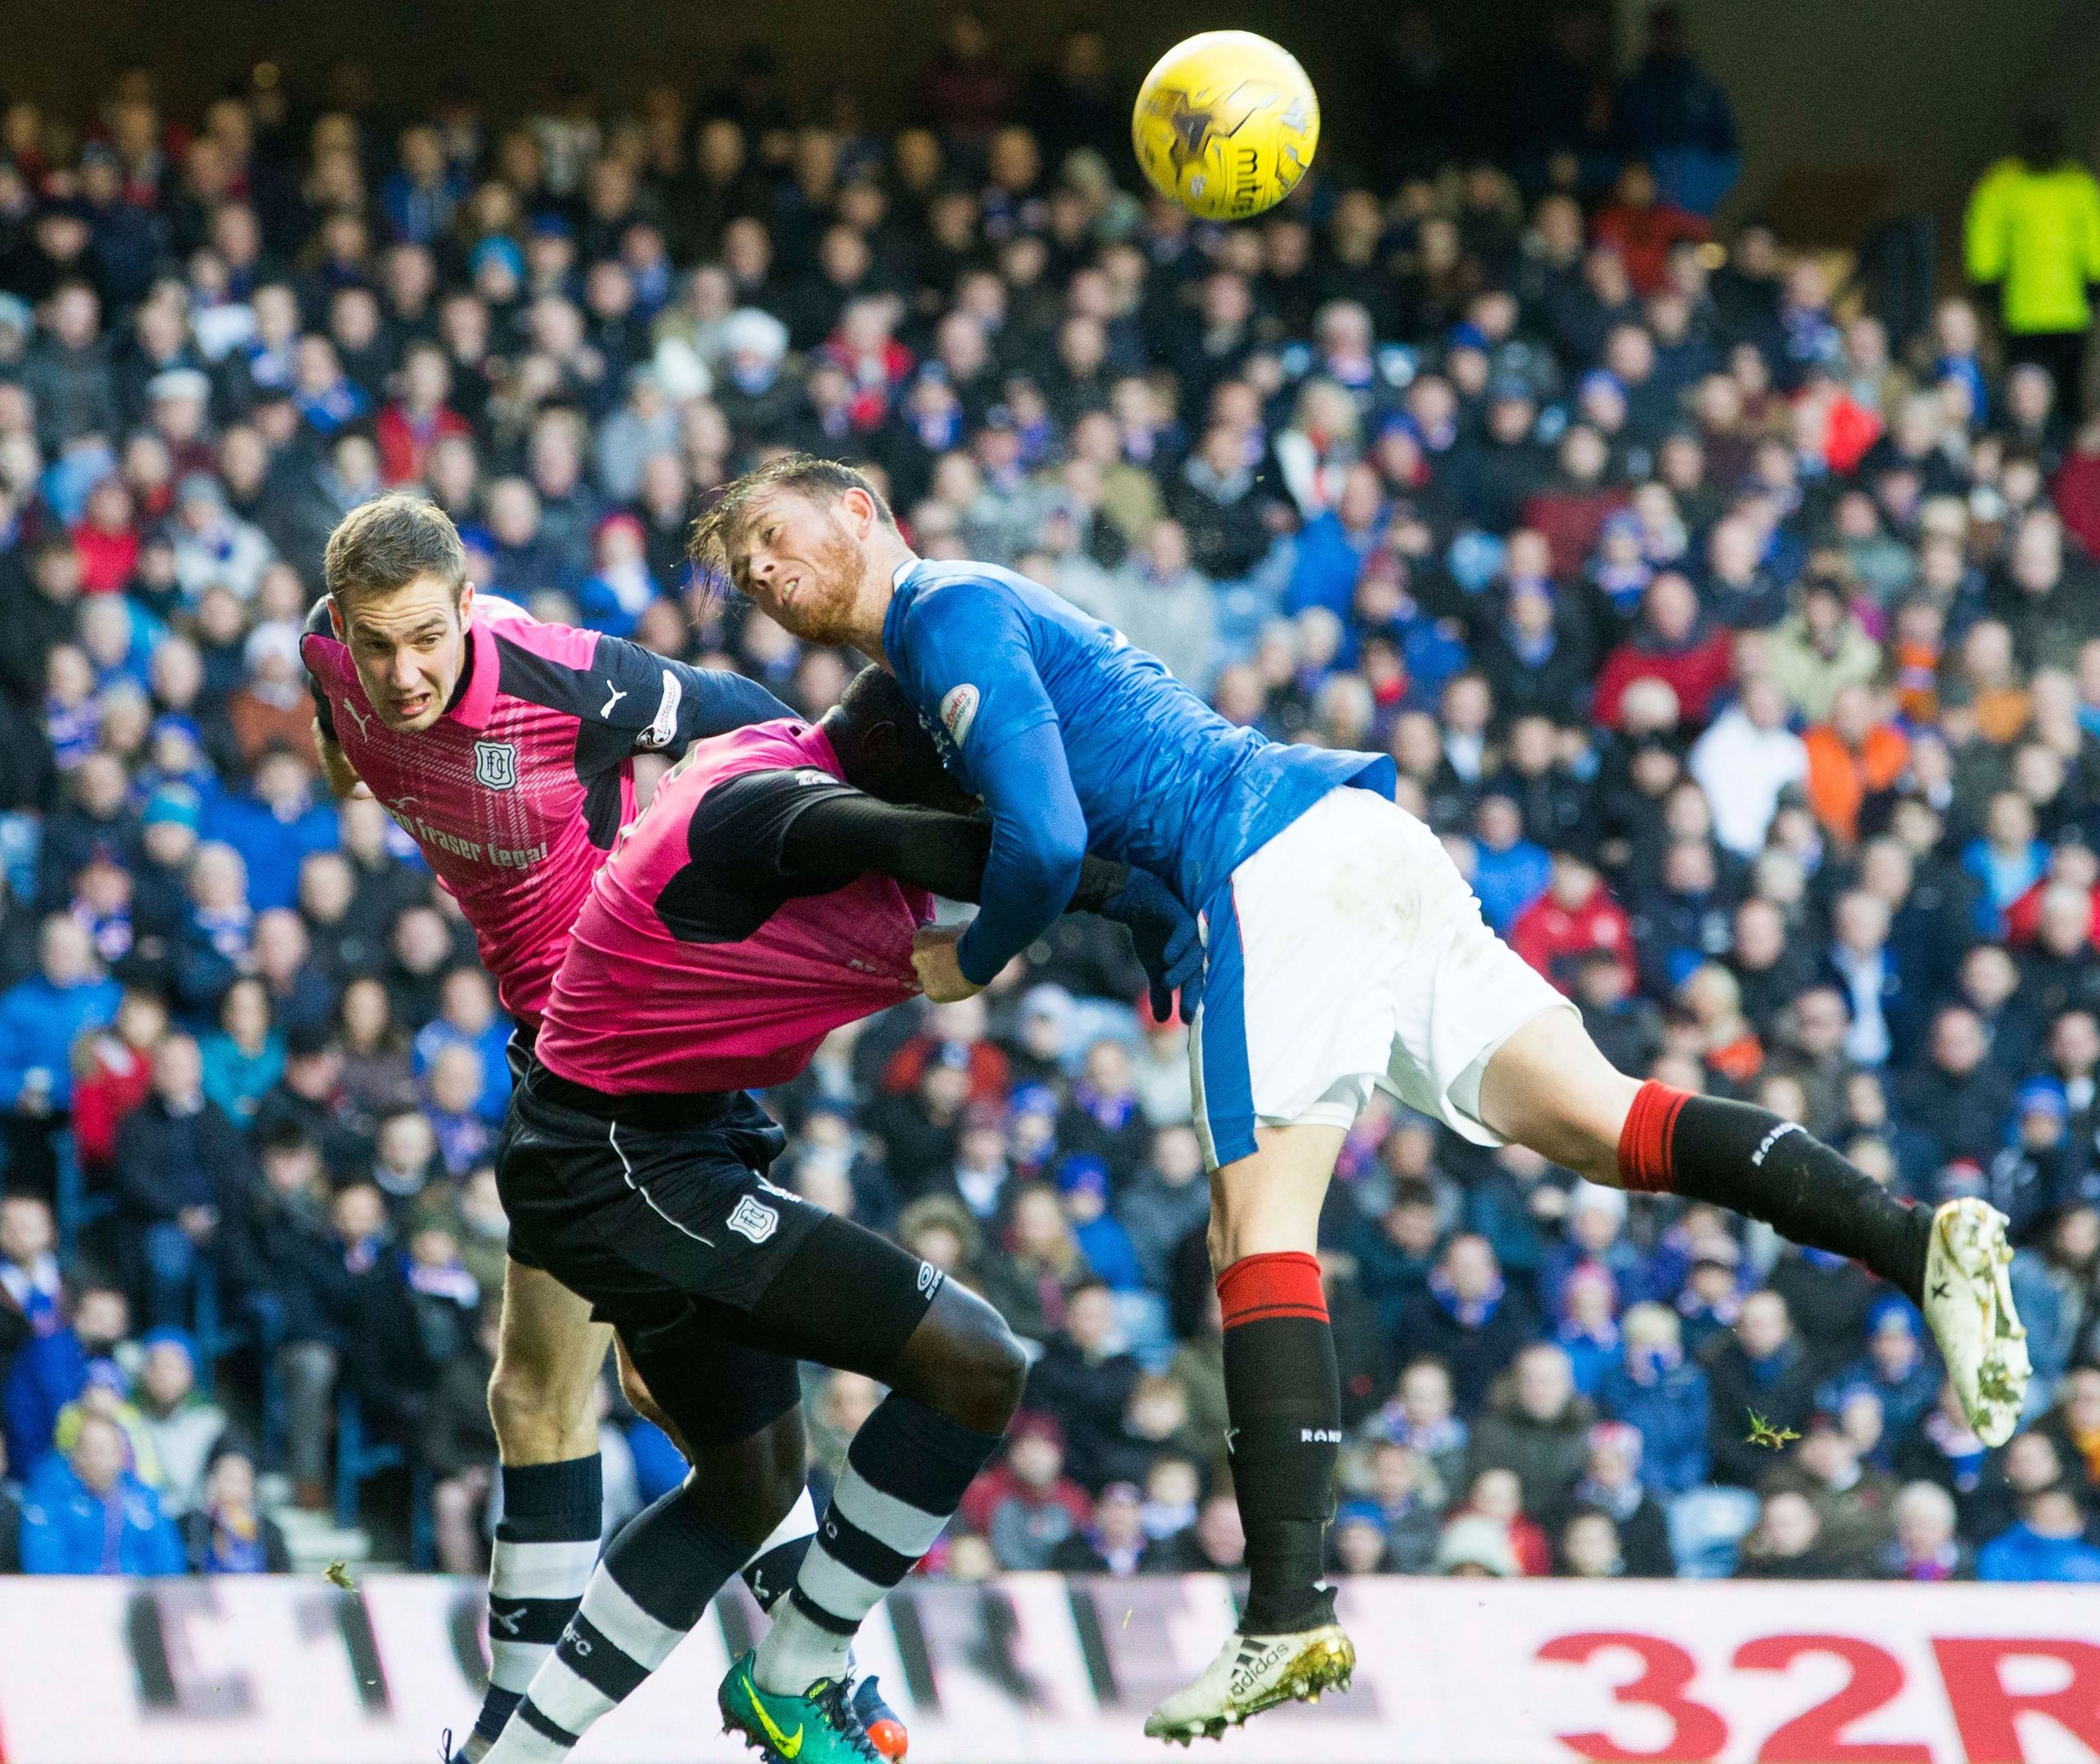 Action from the game at Ibrox.